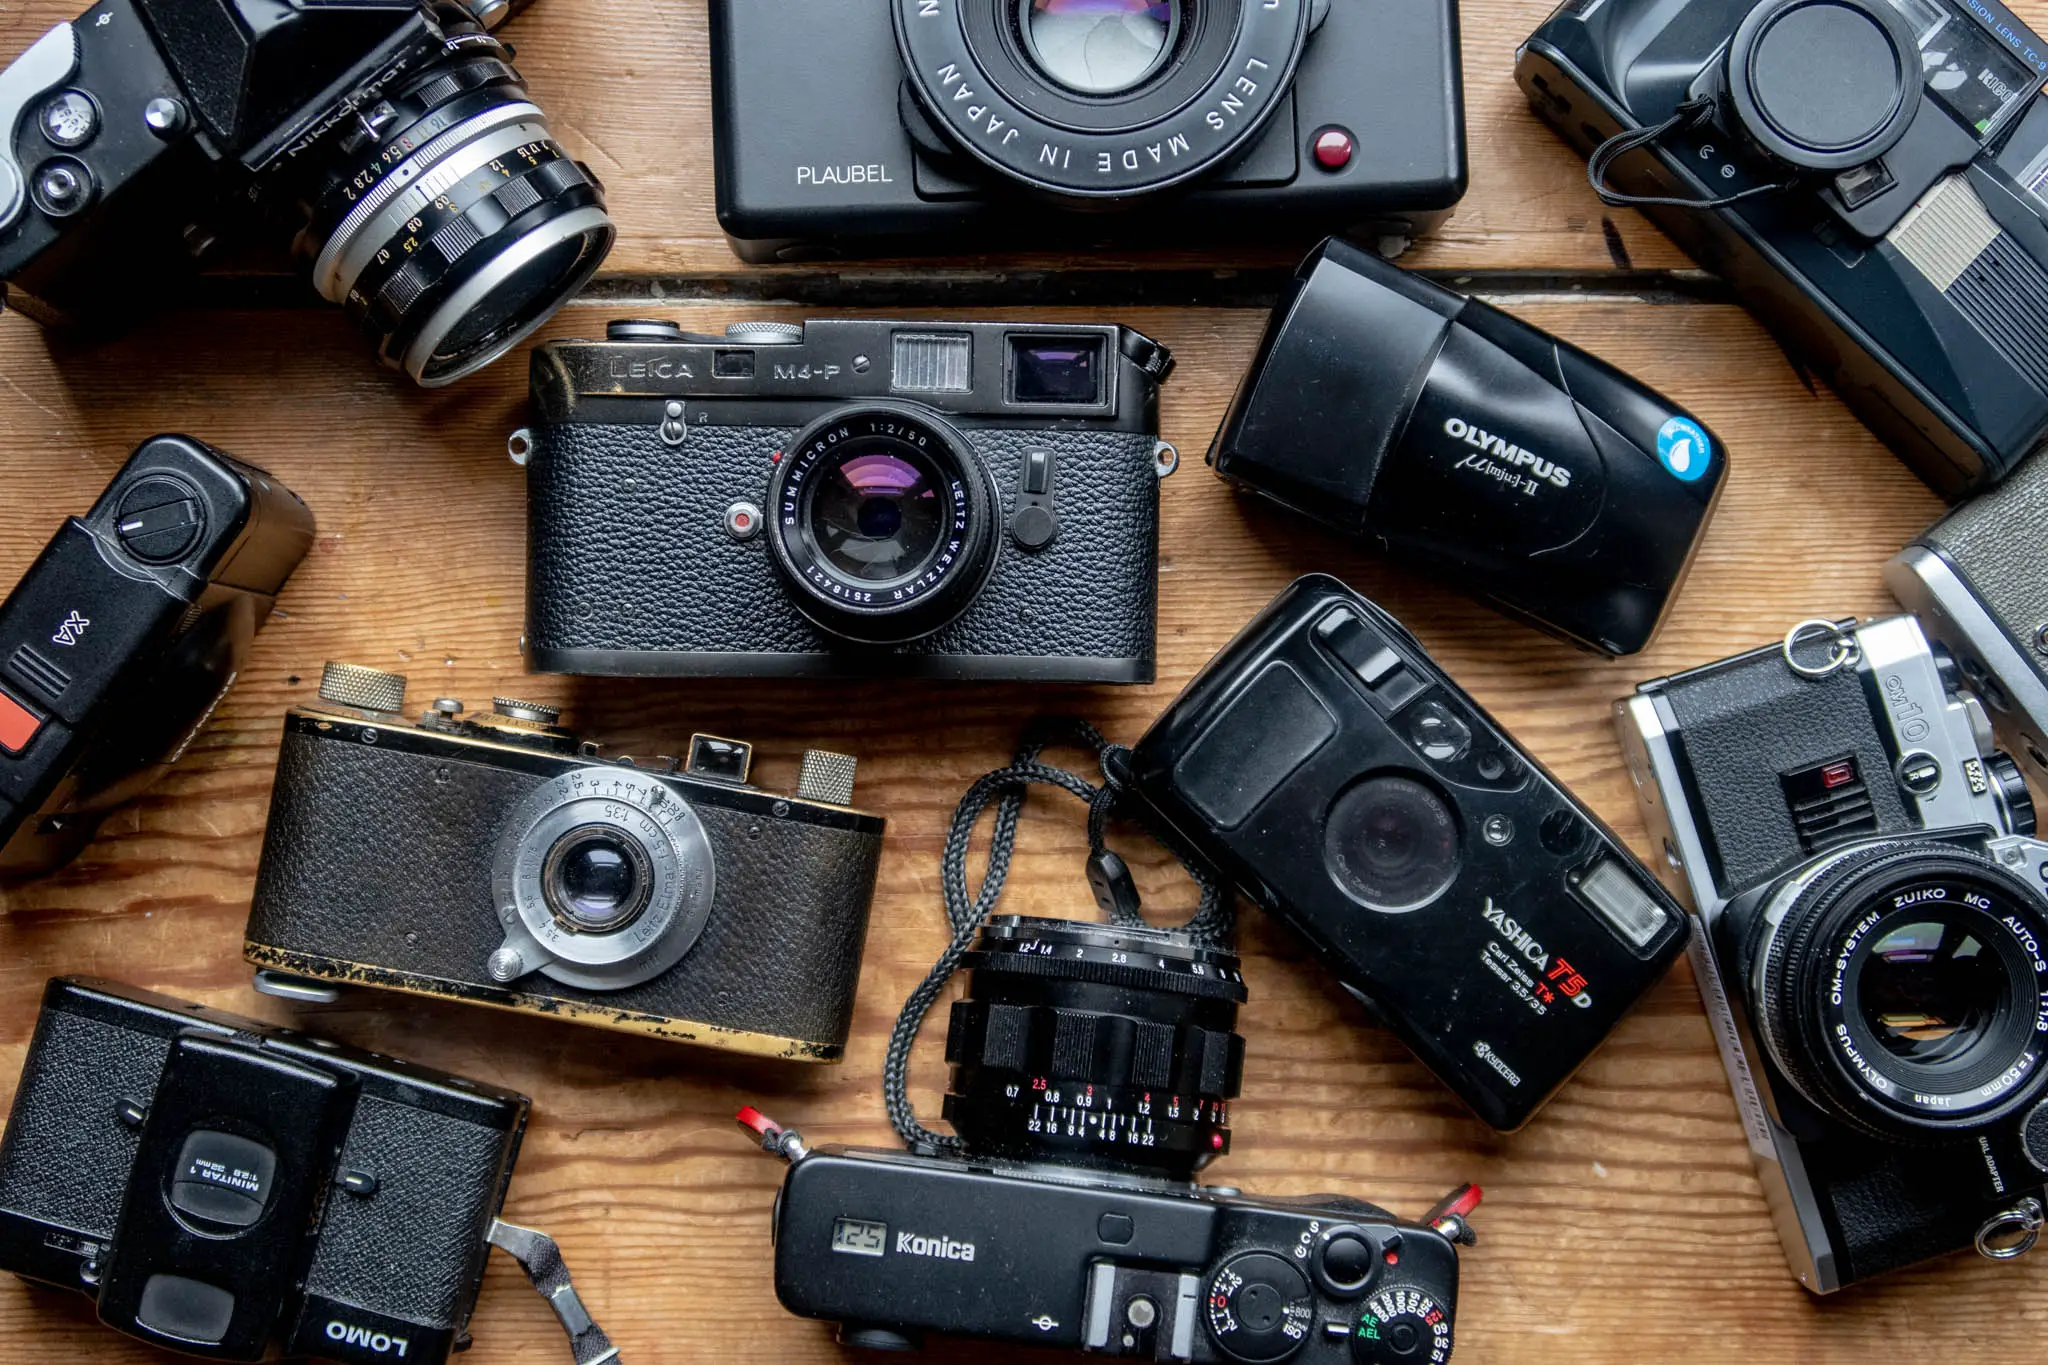 Thinking about spending a stack of cash on a film camera? Read